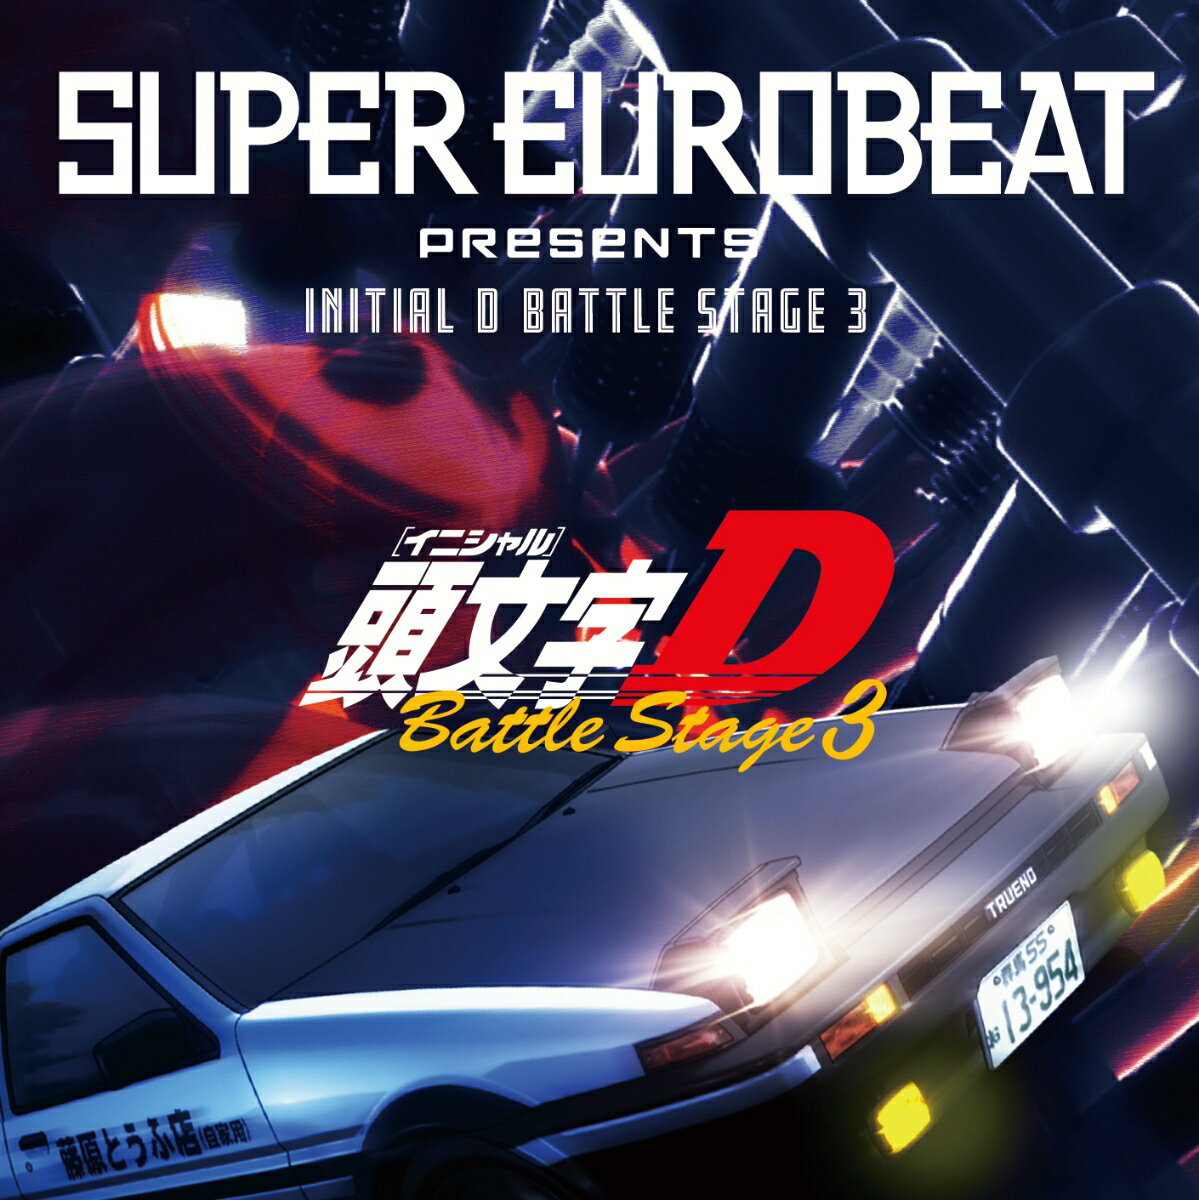 (V.A.)スーパー ユーロビート プレゼンツ イニシャル ディー バトル ステージ スリー 発売日：2021年03月05日 SUPER EUROBEAT PRESENTS INITIAL D BATTLE STAGE 3 JAN：4580055352546 EYCAー13254/5 エイベックス・ピクチャーズ(株) エイベックス・ピクチャーズ(株) 【CD】 01. HIT ME ー ワイルド 02. LASER GUN ー JUNGLE BILL 03. SAVING THE WORLD ー EUROBEAT GIRLS 04. AWAY ー MR. M 05. MILLENIUM ー ROBERT PATTON 06. VICTIM OF YOU ー MICKEY B. 07. SMOKE ON THE FIRE ー P. STONE 08. BACK TO THE RISING SUN ー POWERFUL T. 09. BIG BROTHER ー FASTWAY 10. THE GAME OF LOVE ー VICKY VALE 11. DADDY BOY ー SARAH 12. ETERNITY ー DENISE 13. PRISON OF LOVE ー THE WONDER GIRLS 【CD】 01. RAY LIGHT ー SPIDERS FROM MARS 02. HOW YEAH ー FRANZ TORNADO 03. TAKE ME UP AND HIGHER ー LOU LOU MARINA 04. MUSIC IN YOU ー DJ FORCE 05. MAYA ー PAUL HARRIS & CHERRY 06. EASY GAME ー ELENA FERRETTI 07. POWERNIGHT ー ANNIE 08. LOST IN TIME ー MIKE DANGER 09. COME BACK TO ME ー ANIKA 10. YOUNG & WILD ー FASTWAY 11. EUROHERO ー NEO 12. TAKE ME HIGHER 2020 ー DAVE RODGERS ※収録内容は変更になる場合がございます CD アニメ 国内アニメ音楽